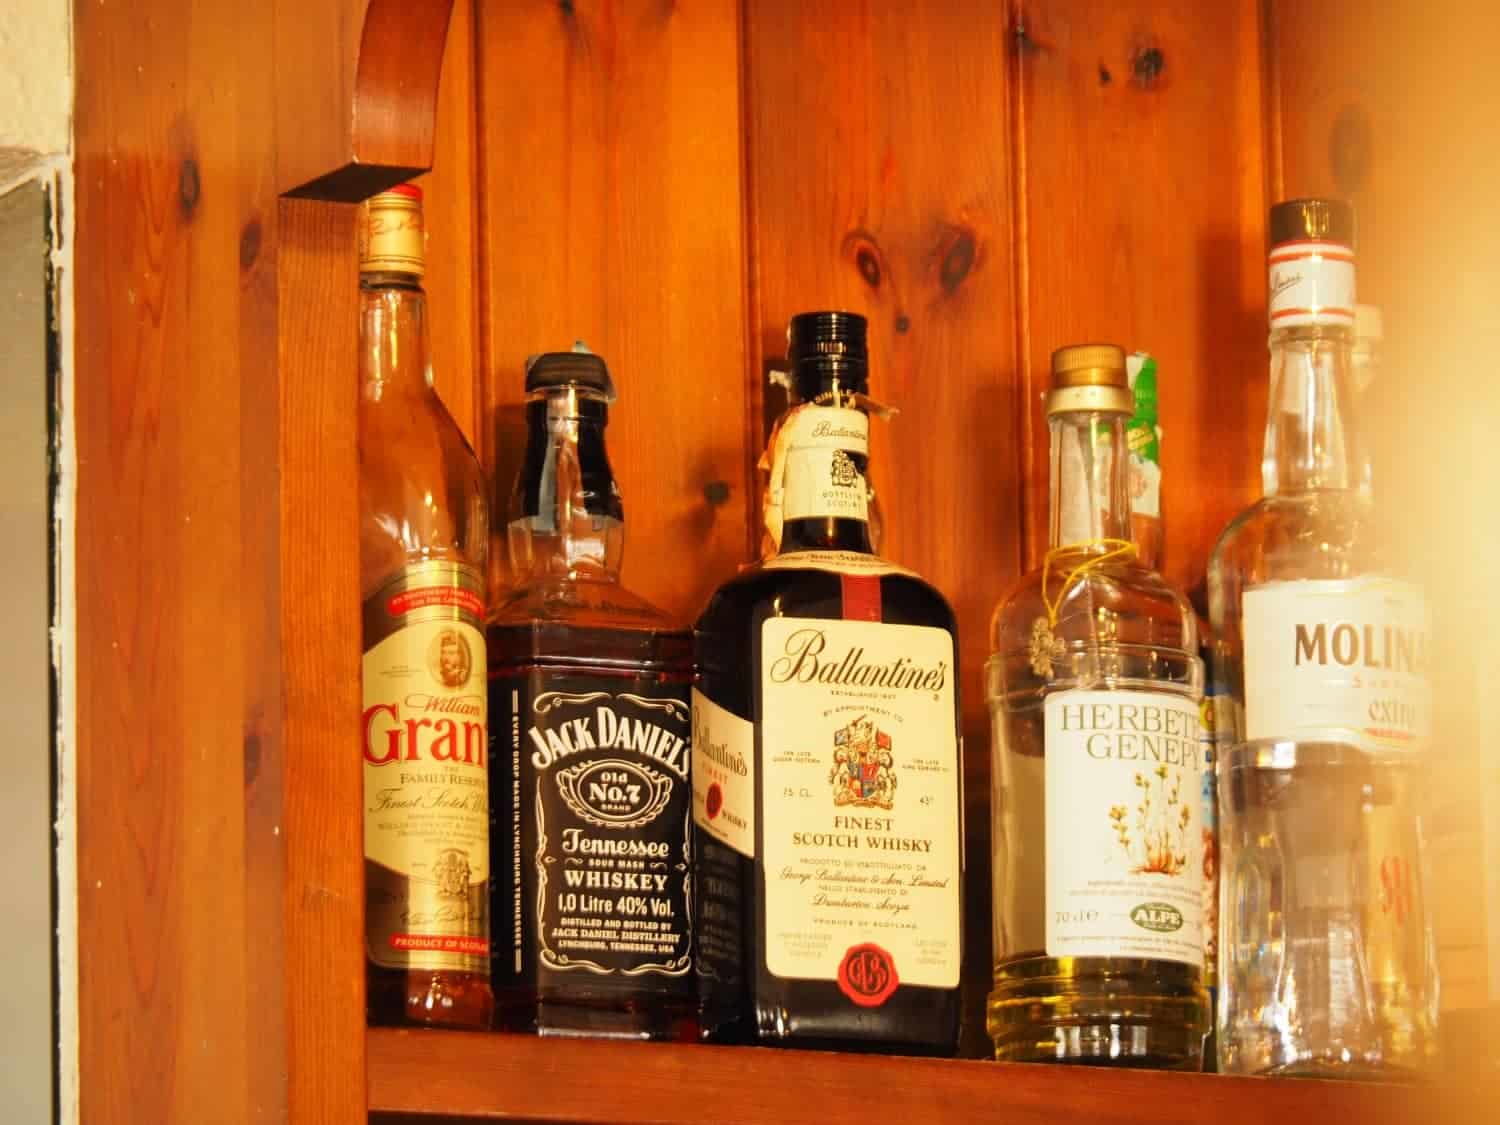 How Should Whiskey Be Stored To Maintain Its Quality?